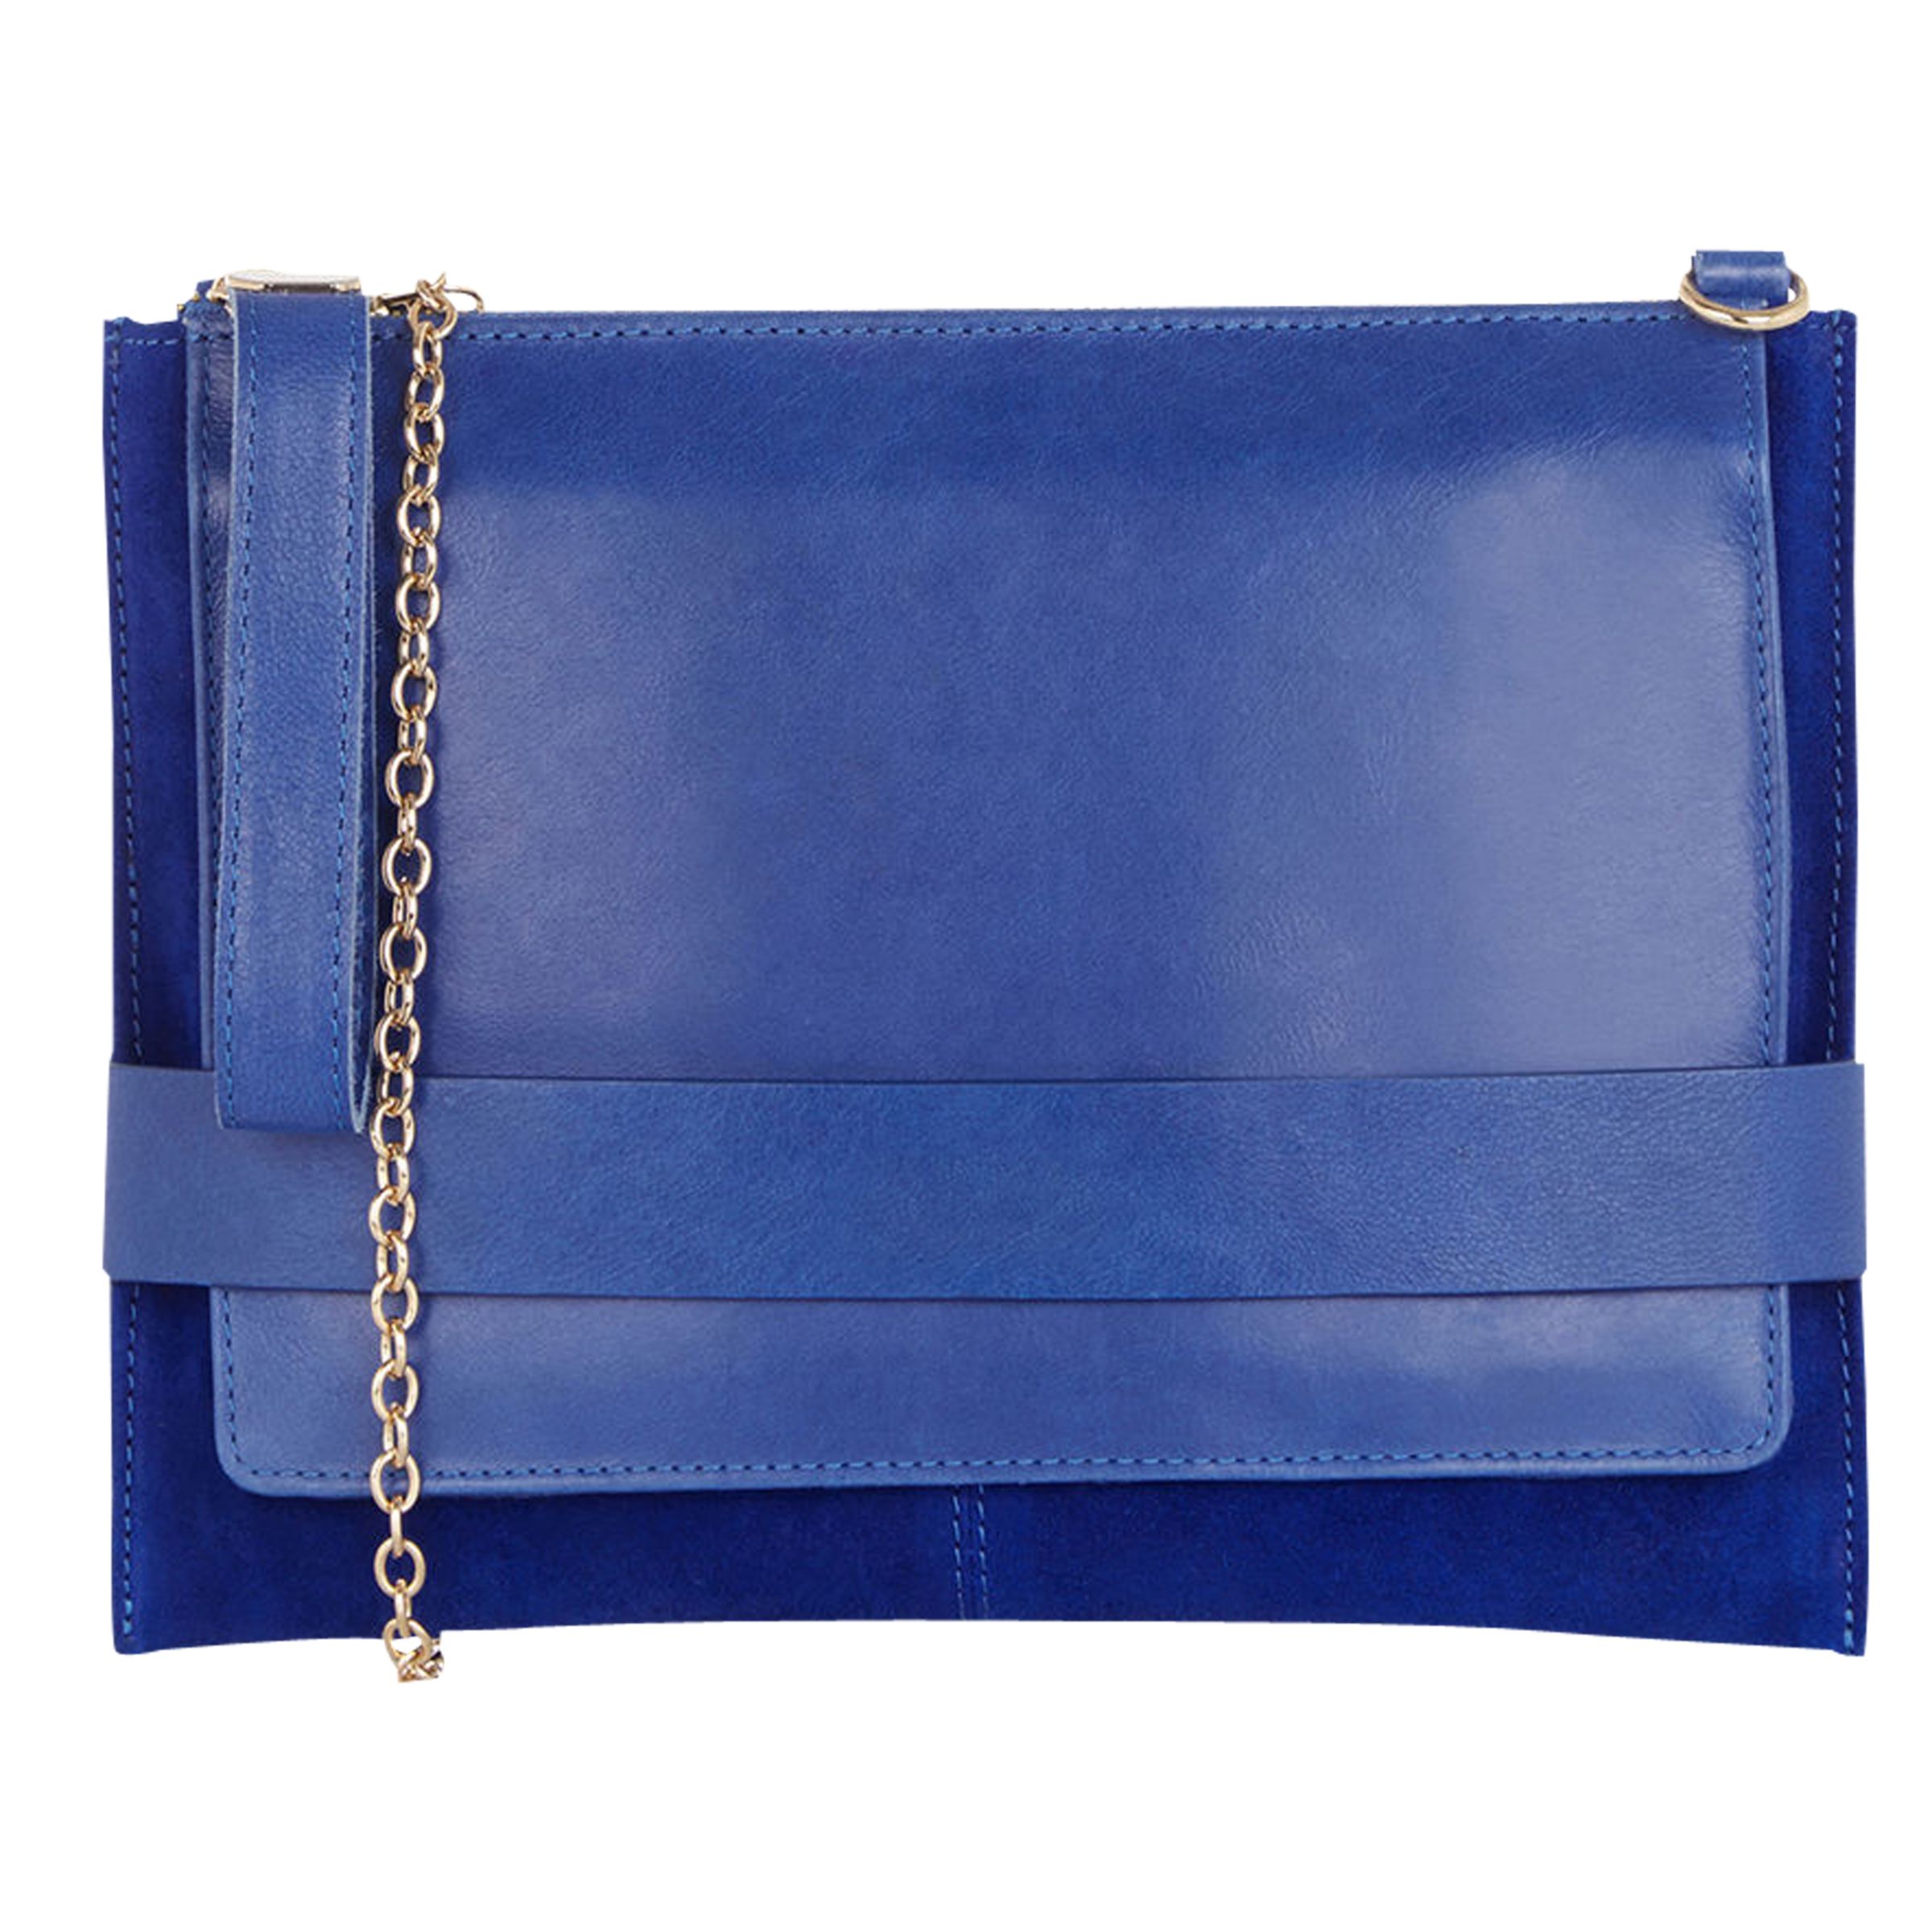 Oasis Lucia Leather Cross Body Clutch Bag at John Lewis & Partners